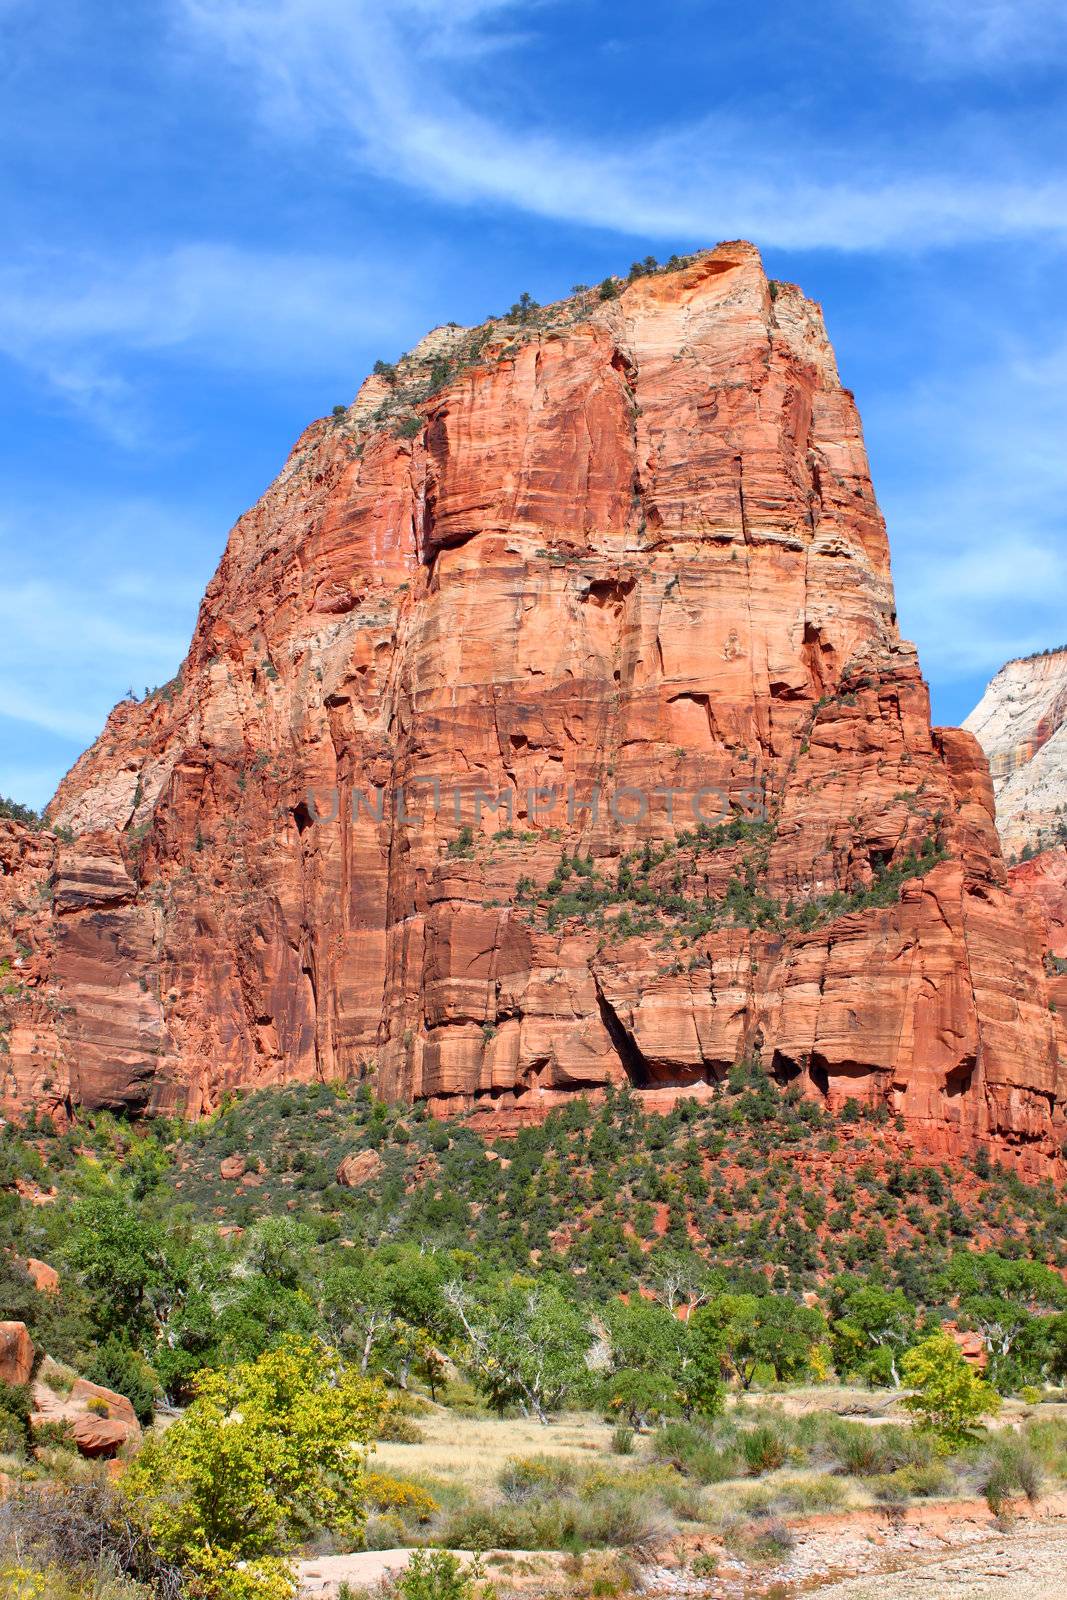 The prominent mountain Angels Landing in Zion National Park of Utah.